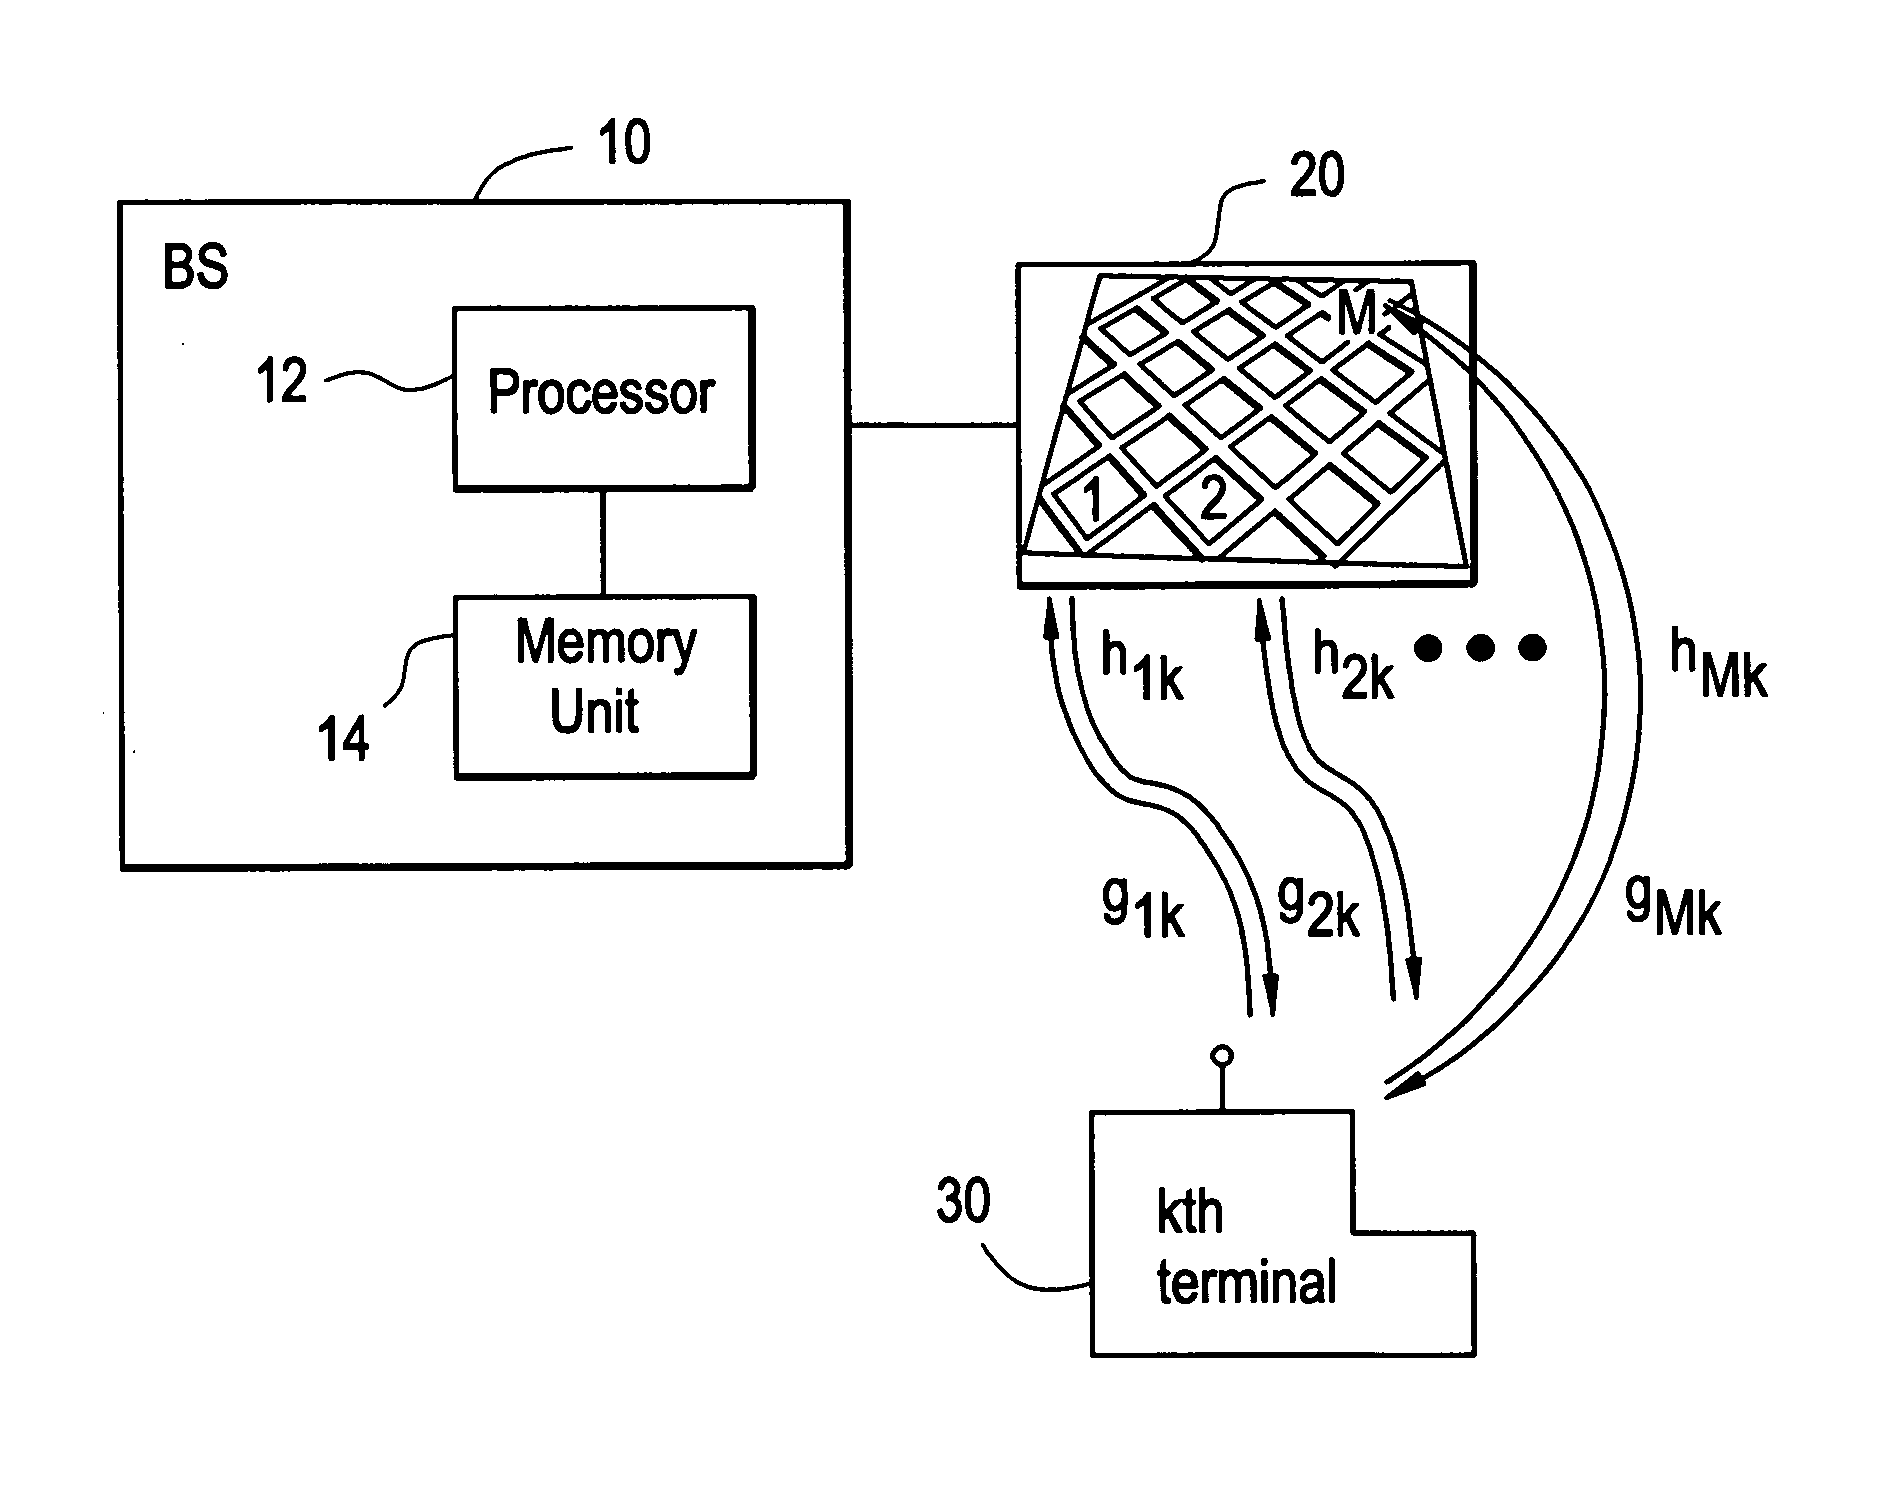 Method for beamforming transmissions from a network element having a plurality of antennas, and the network element